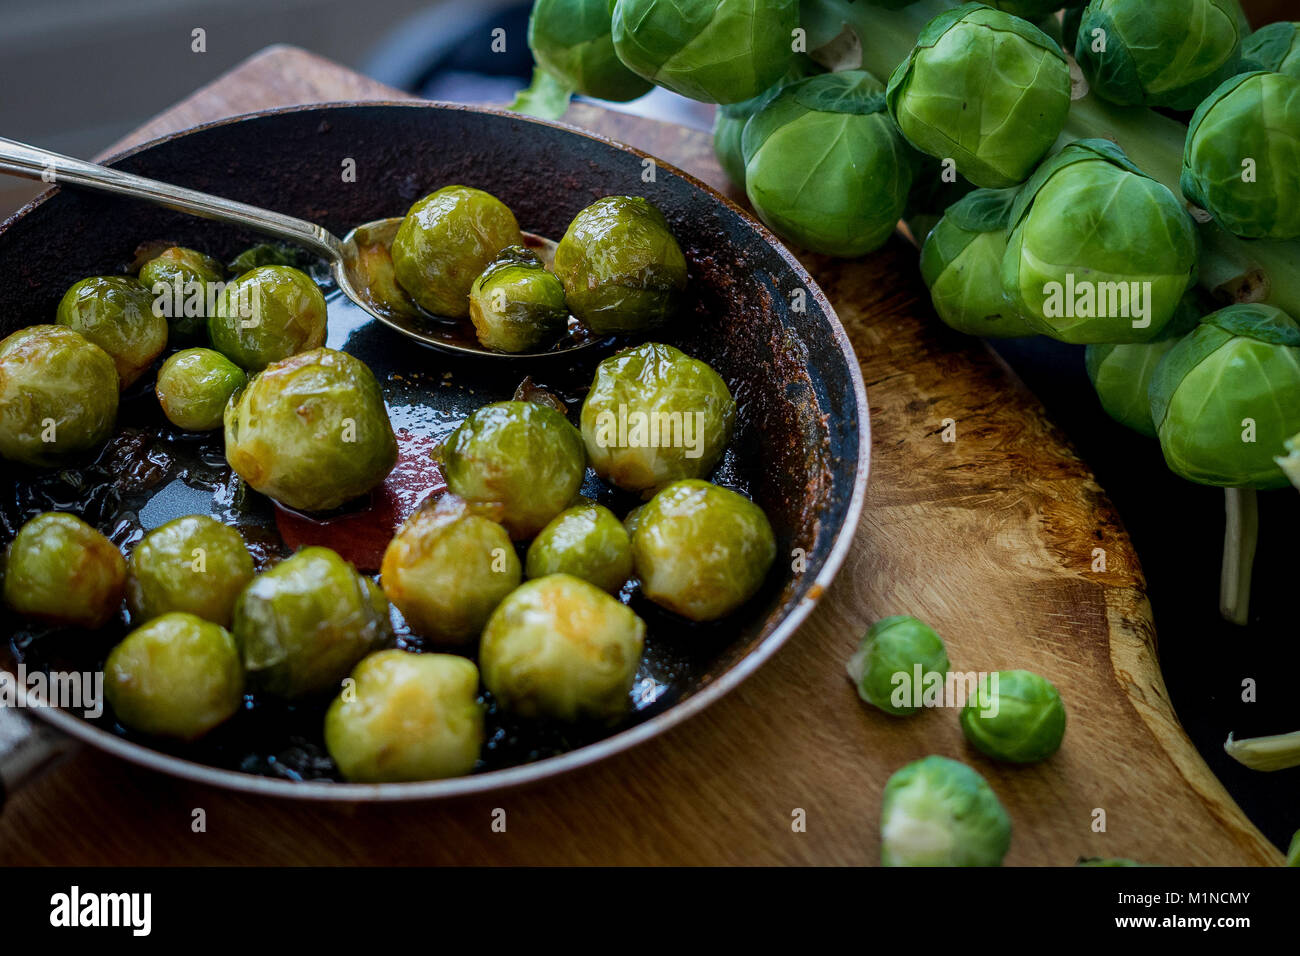 Brussel Sprouts with a marmite butter glaze Stock Photo